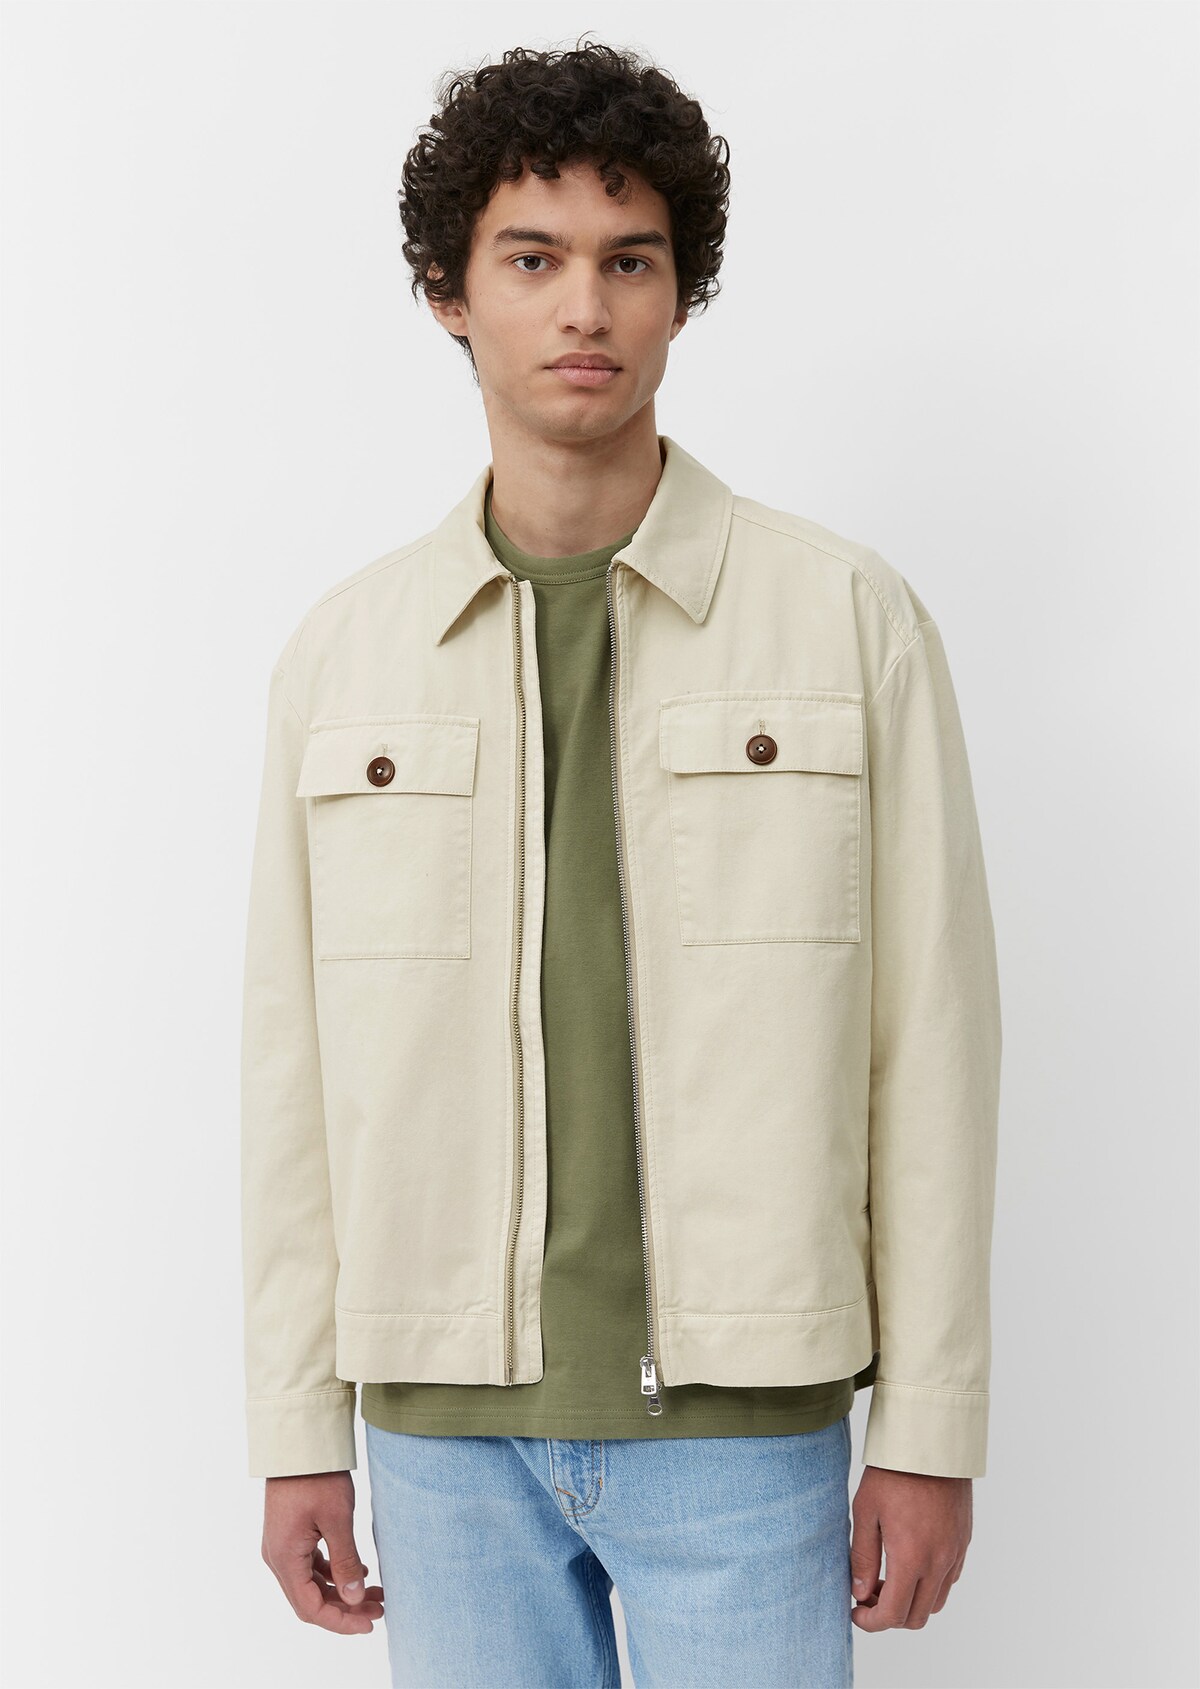 Oversized jacket in peached twill fabric - beige | Jackets | MARC O’POLO